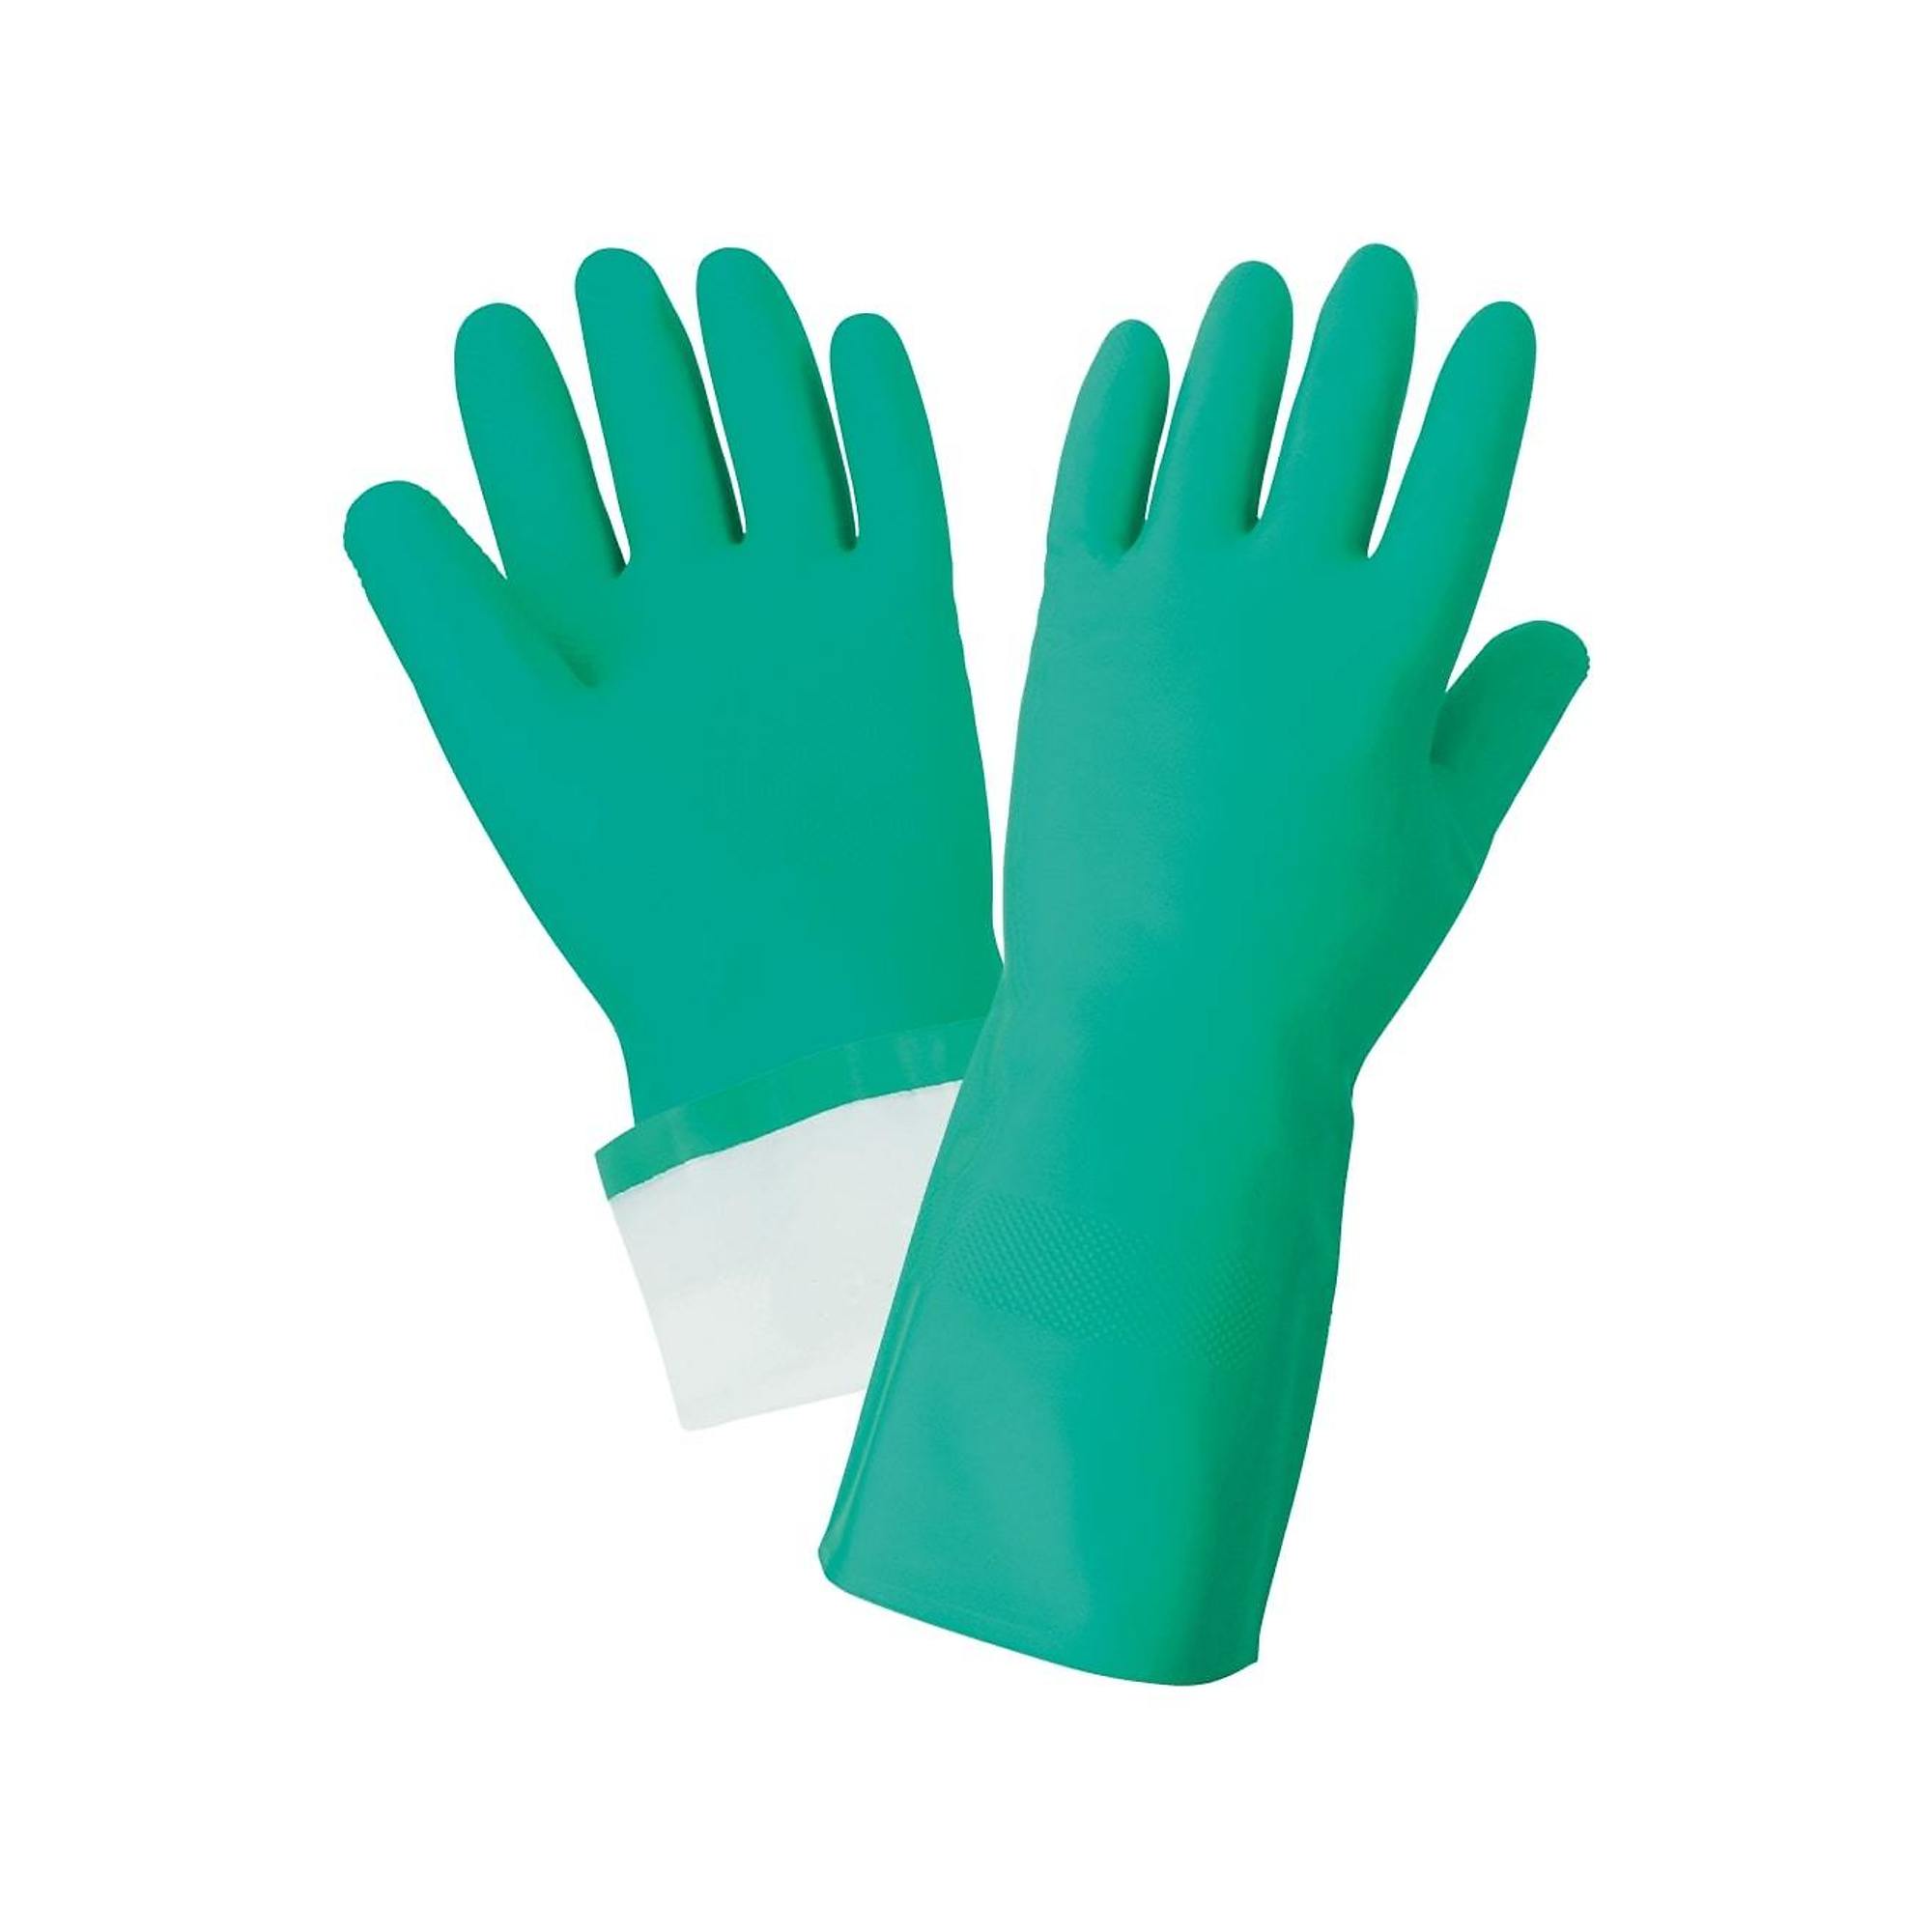 FrogWear, 15-Mil, 13Inch, Flock-Line Nitrile Diamond Grip Gloves-12 Pairs, Size M, Color Green, Included (qty.) 12 Model 515F-8(M)